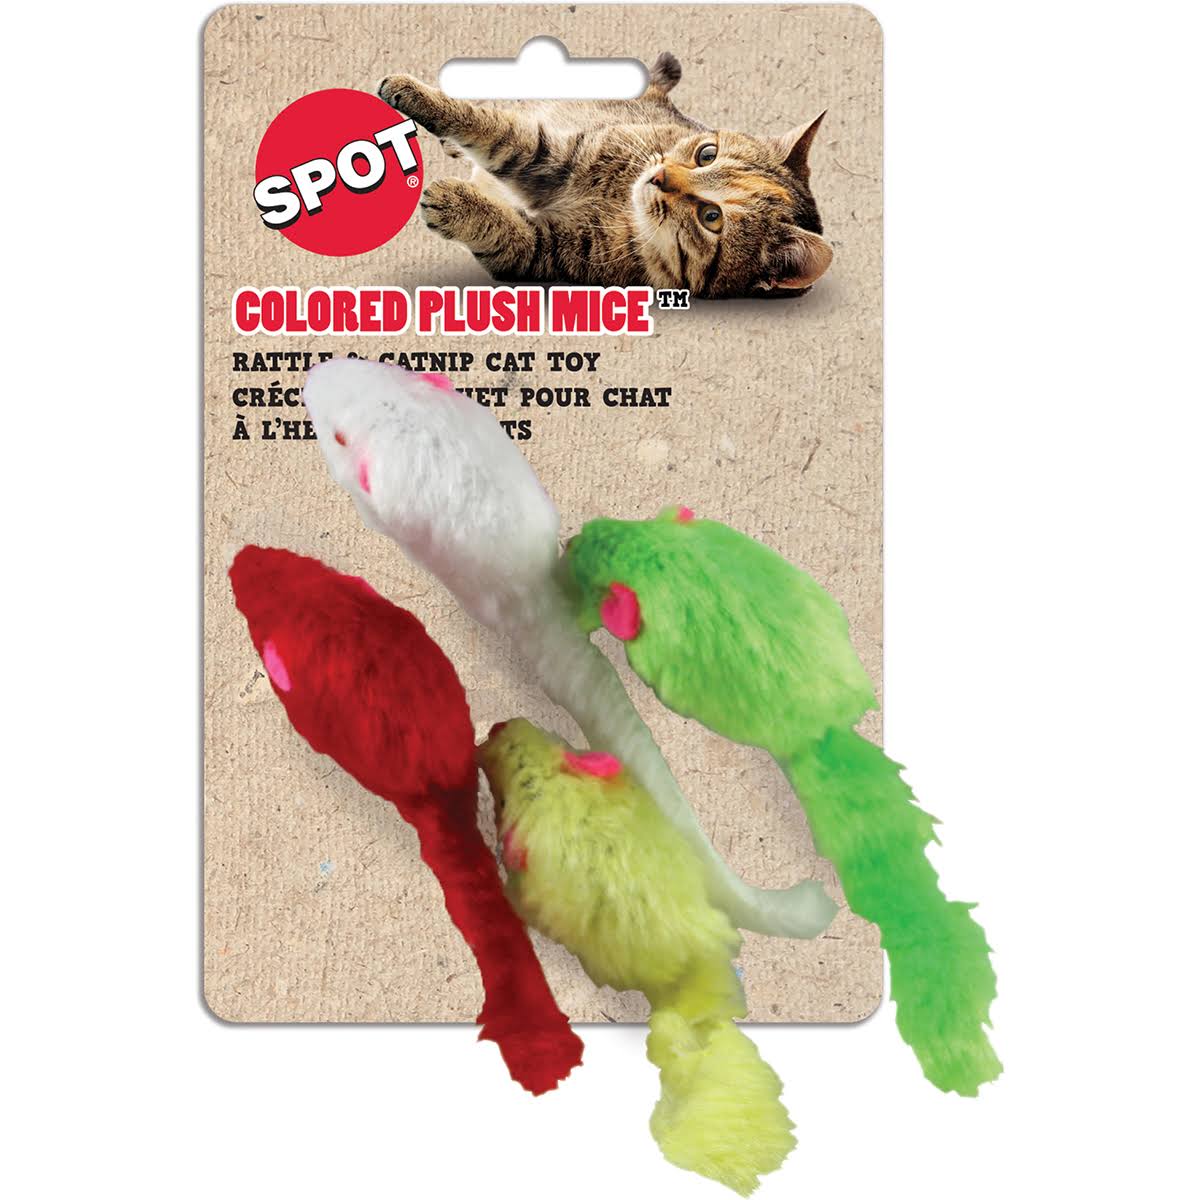 Ethical Colored Plush Mice with Catnip Cat Toy - 4pk